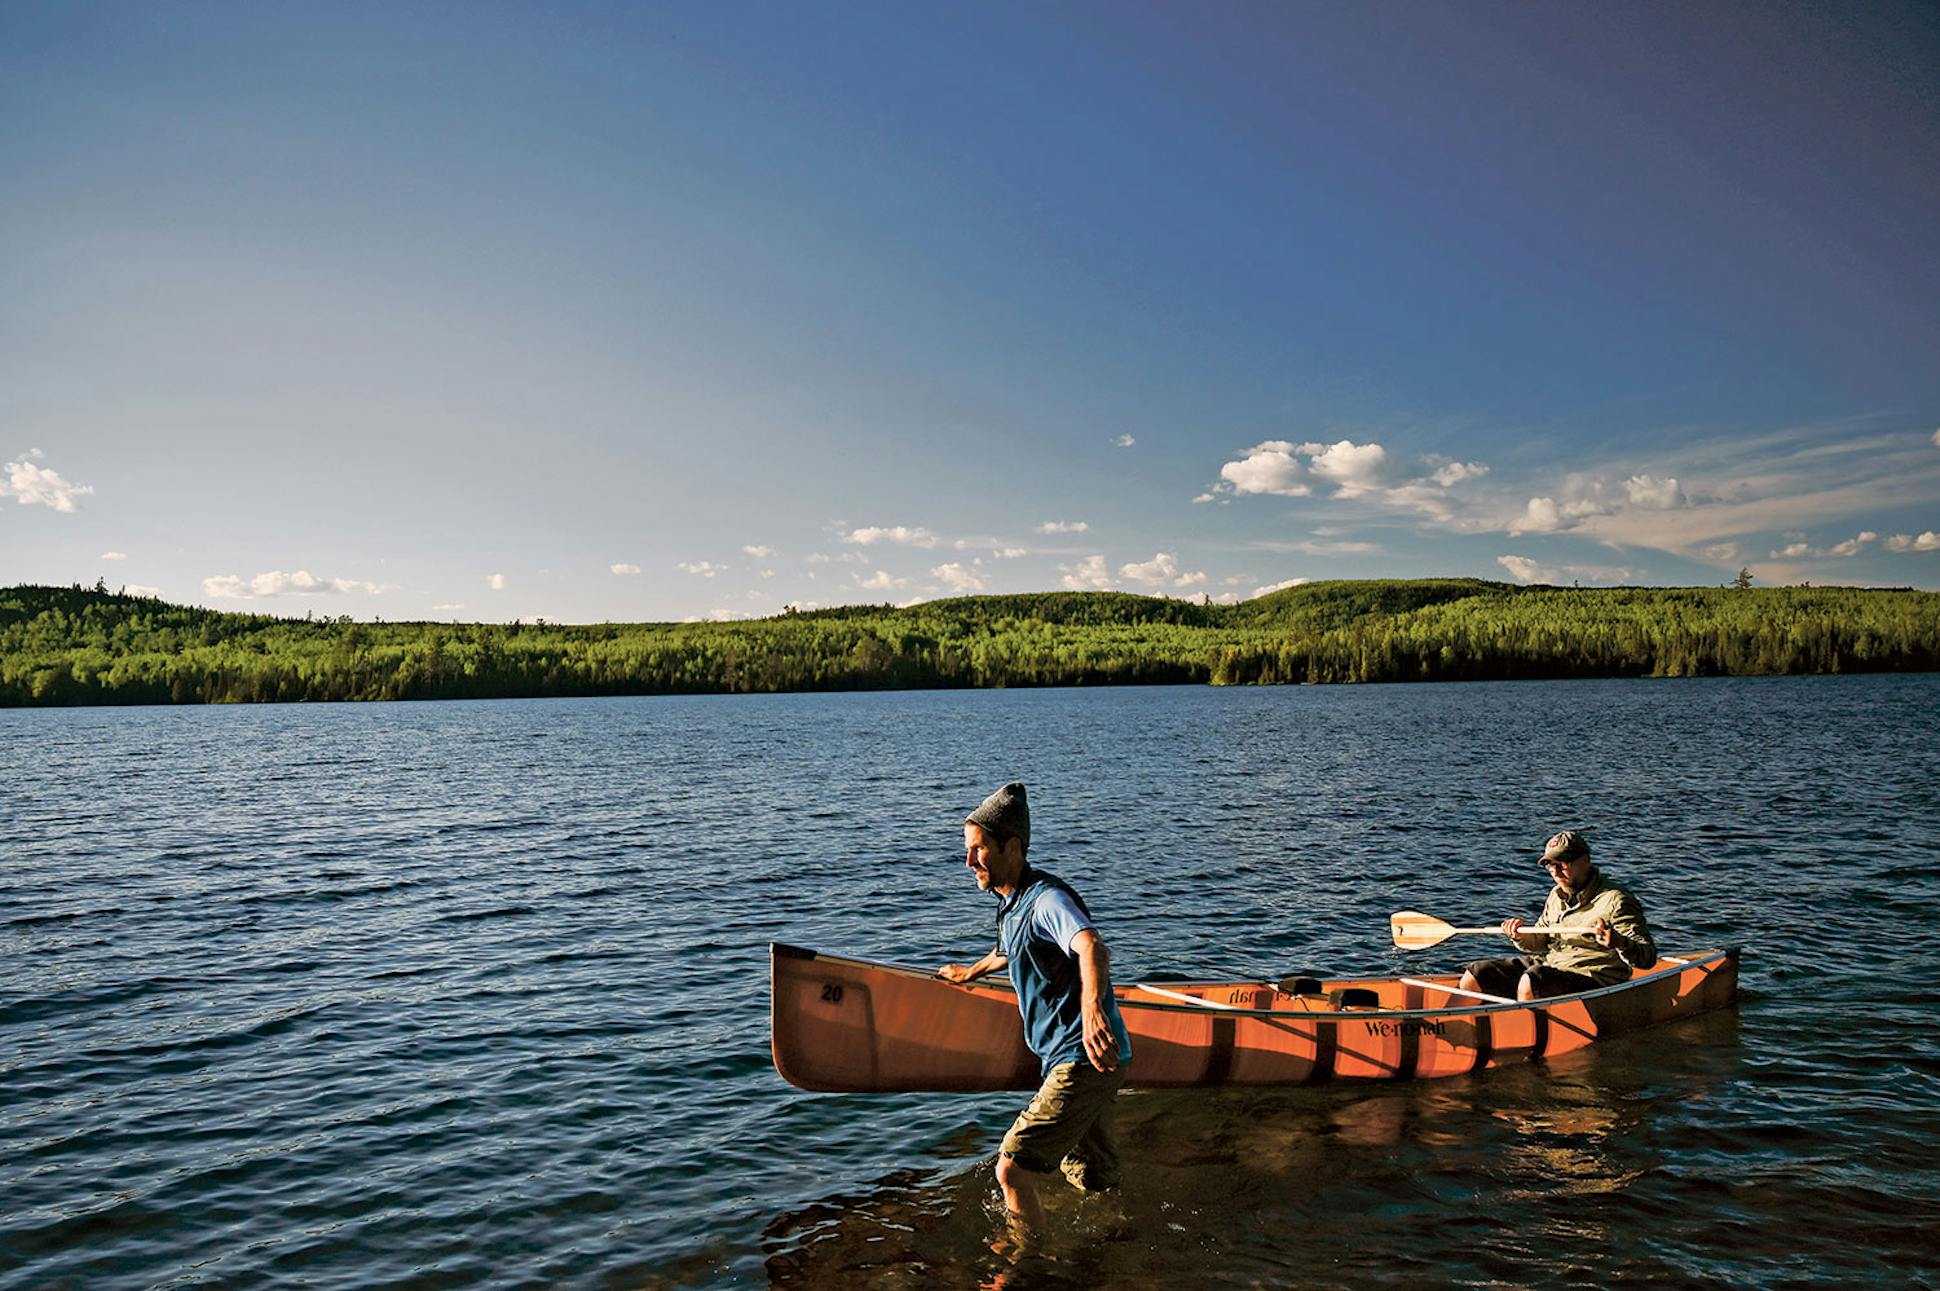  Bob Timmons, left, and Tony Jones on Mountain Lake, which offered sweeping views of the Canadian landscape.